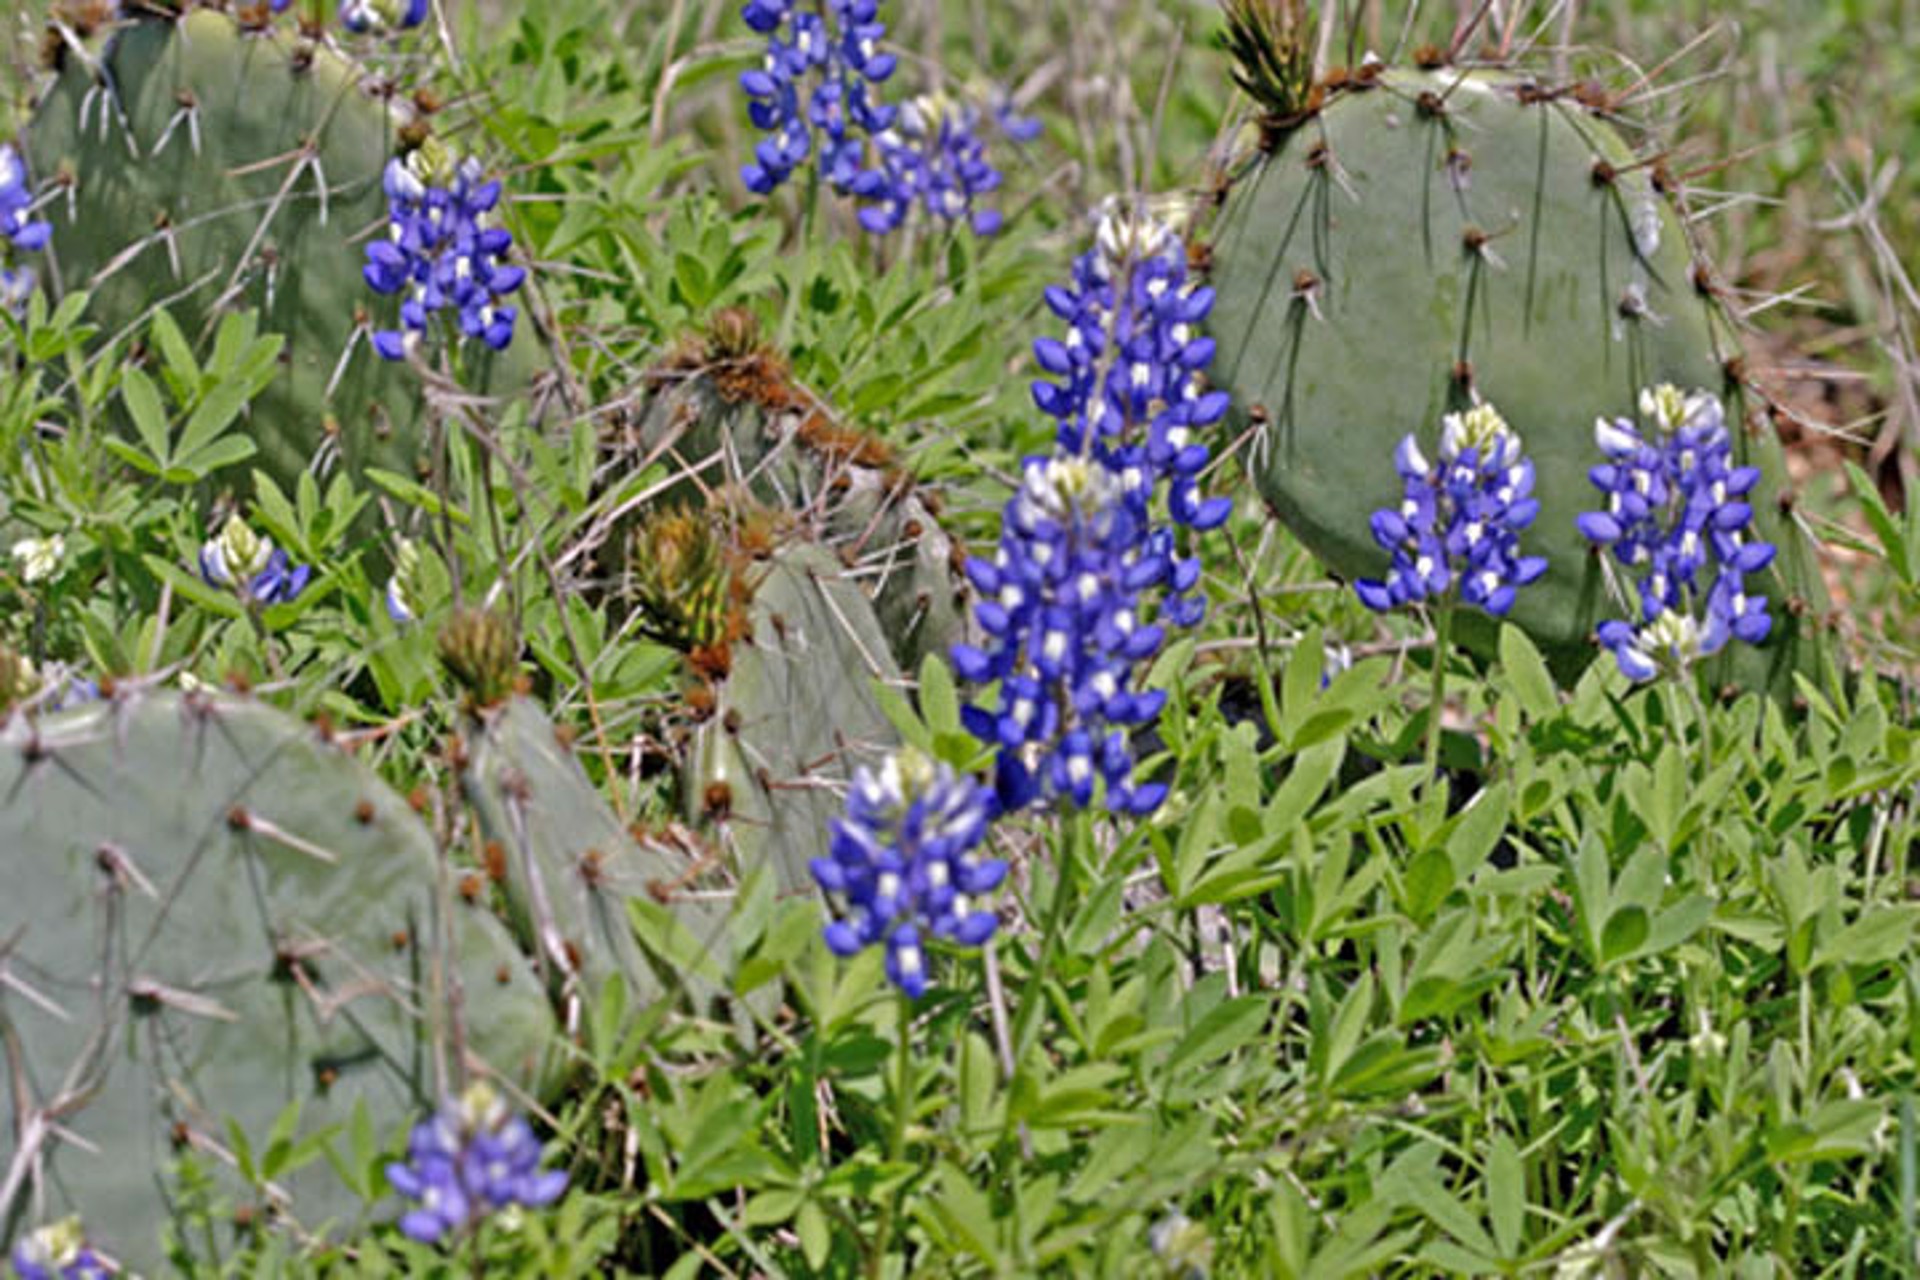 Spring Bluebonnets and Cactus by Rob Pitzer